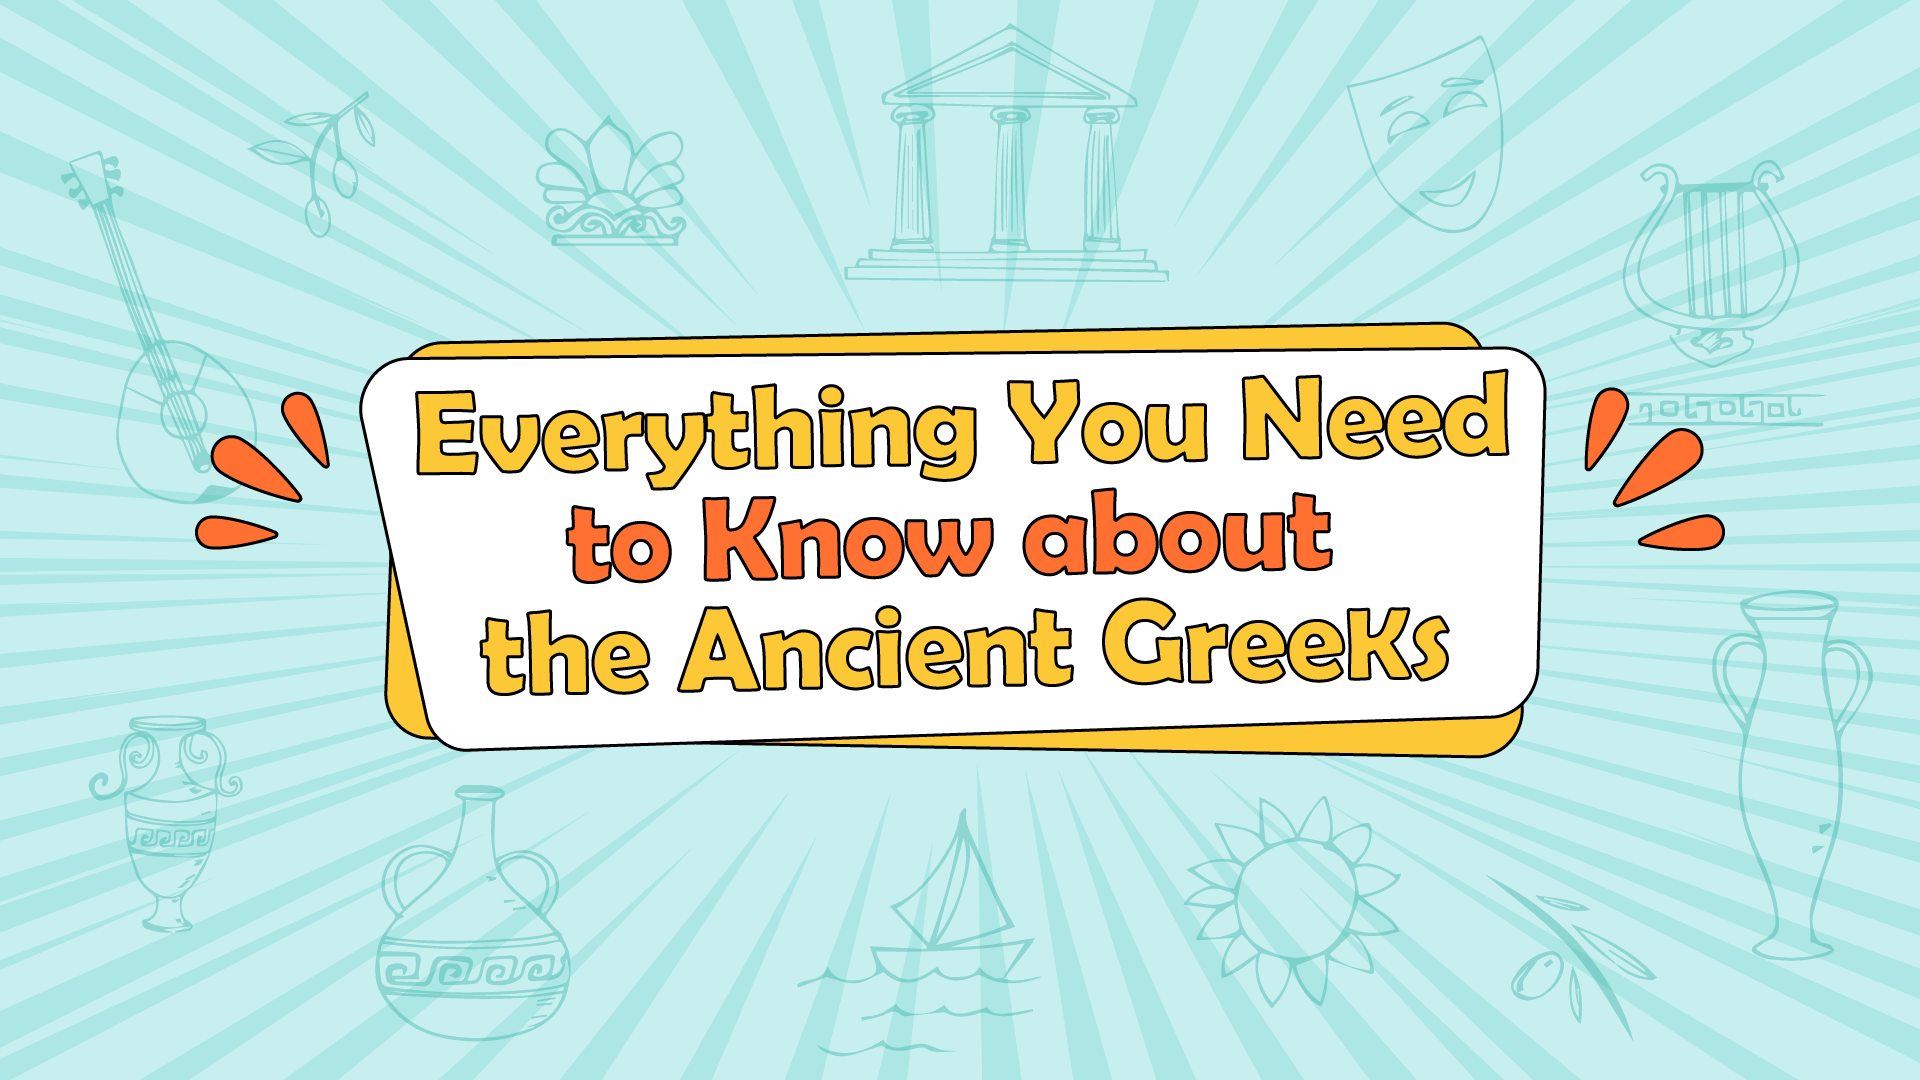 Everything You Need to Know about the Ancient Greeks